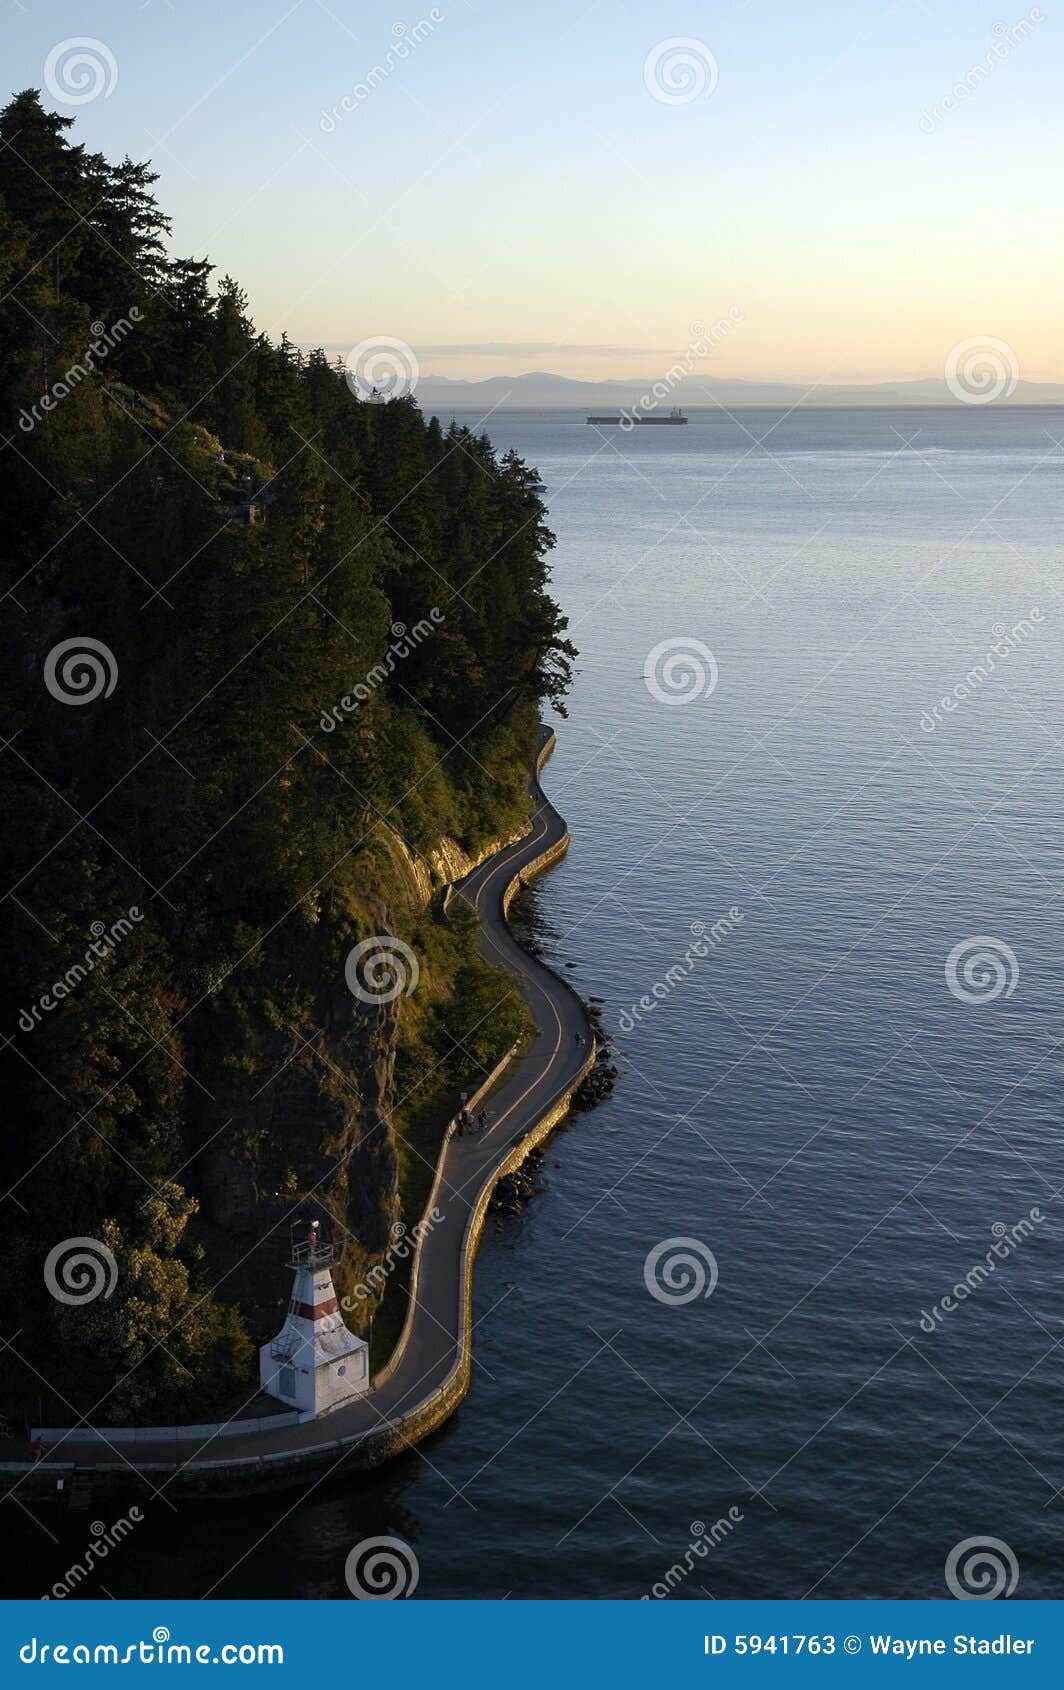 vancouver seawall from above